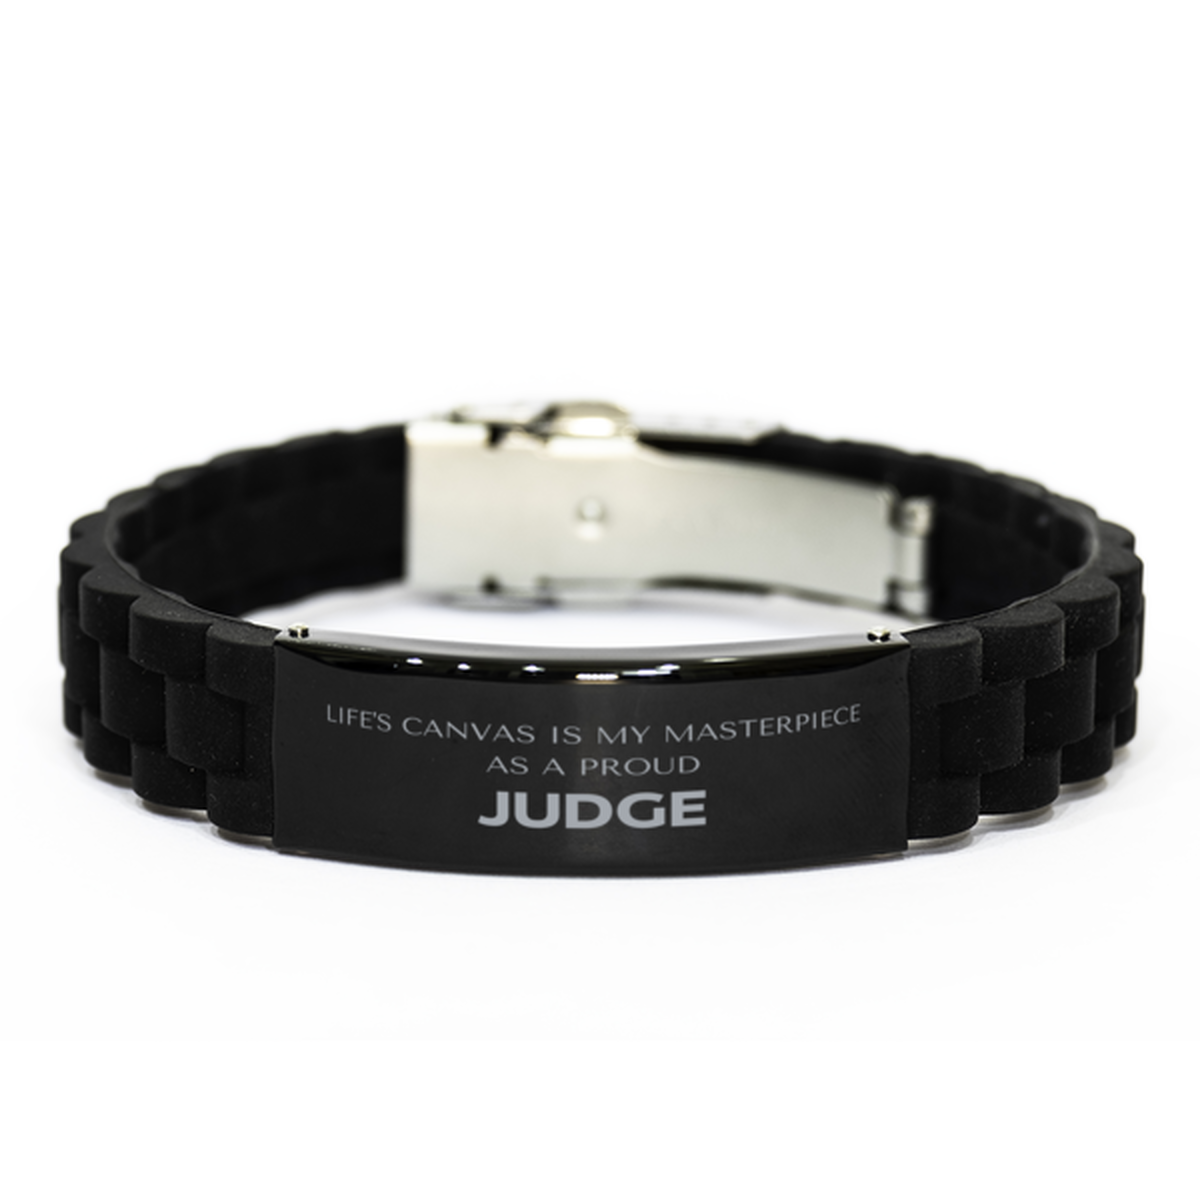 Proud Judge Gifts, Life's canvas is my masterpiece, Epic Birthday Christmas Unique Black Glidelock Clasp Bracelet For Judge, Coworkers, Men, Women, Friends